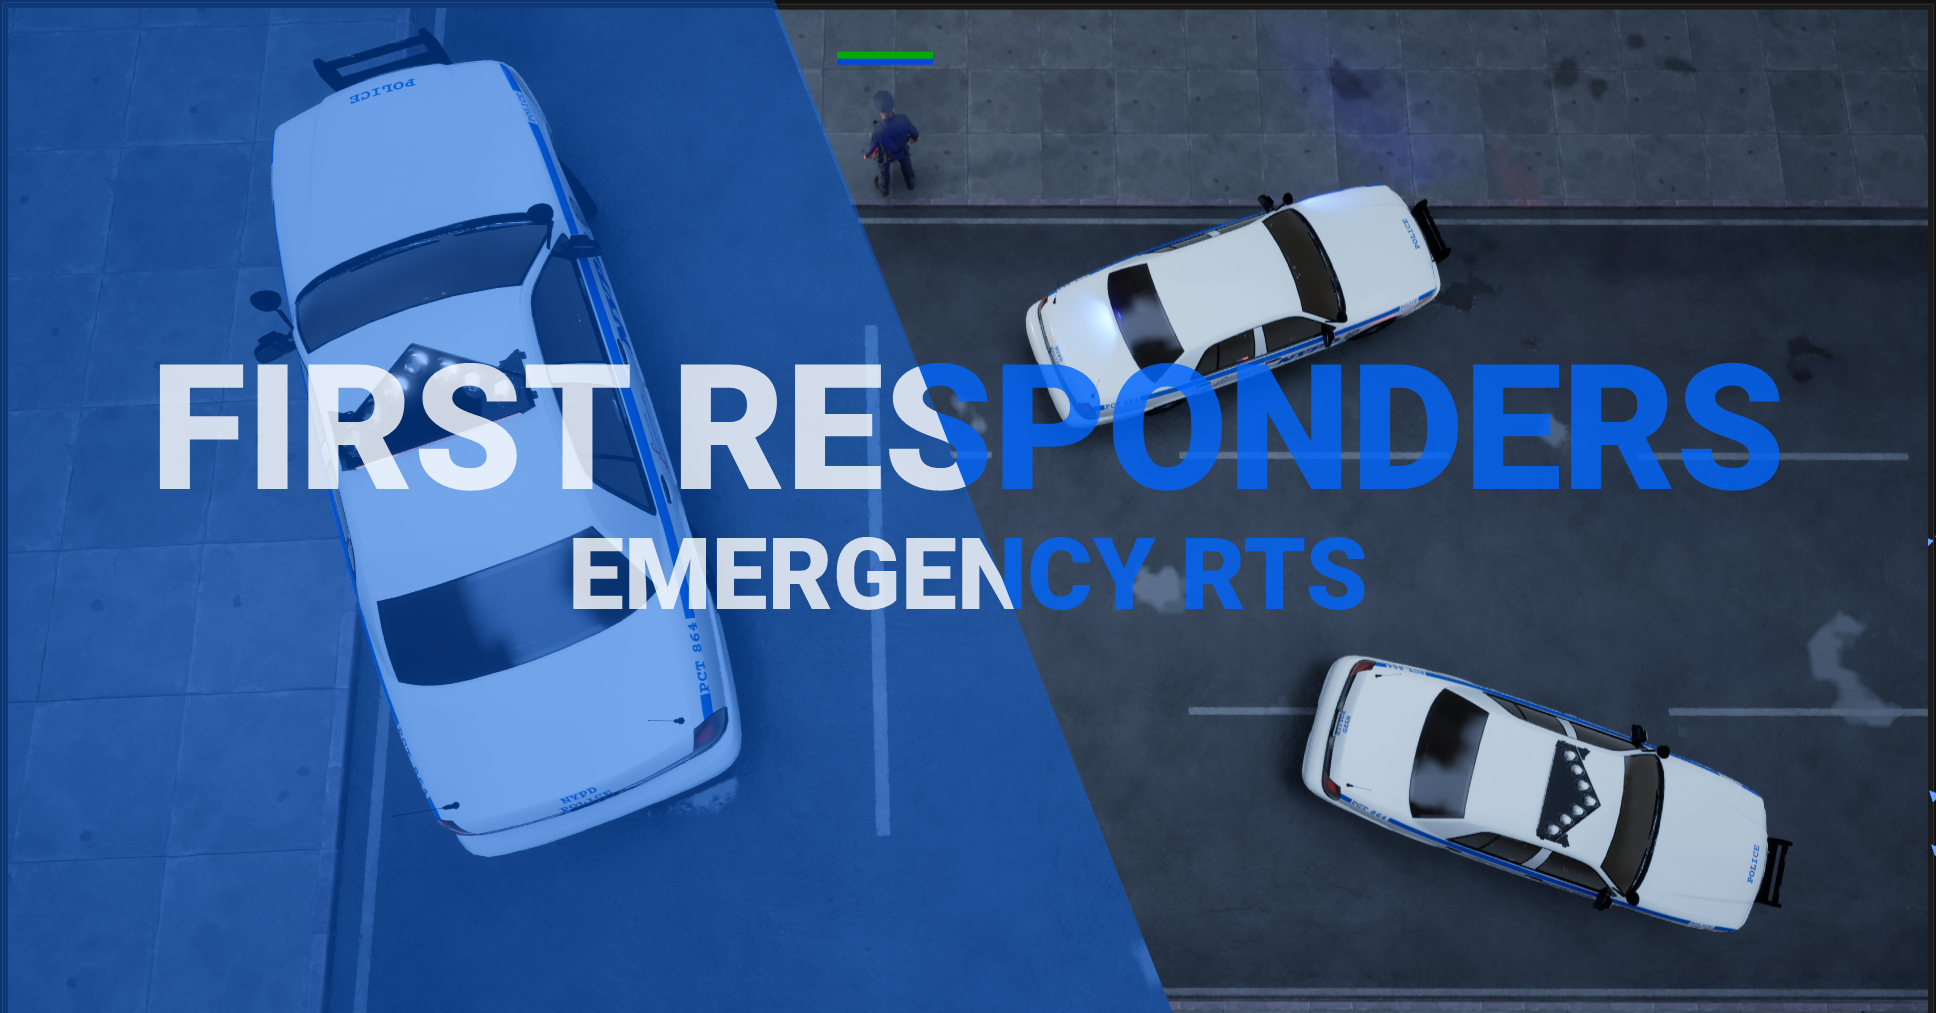 Emergency RTS "First Responders"